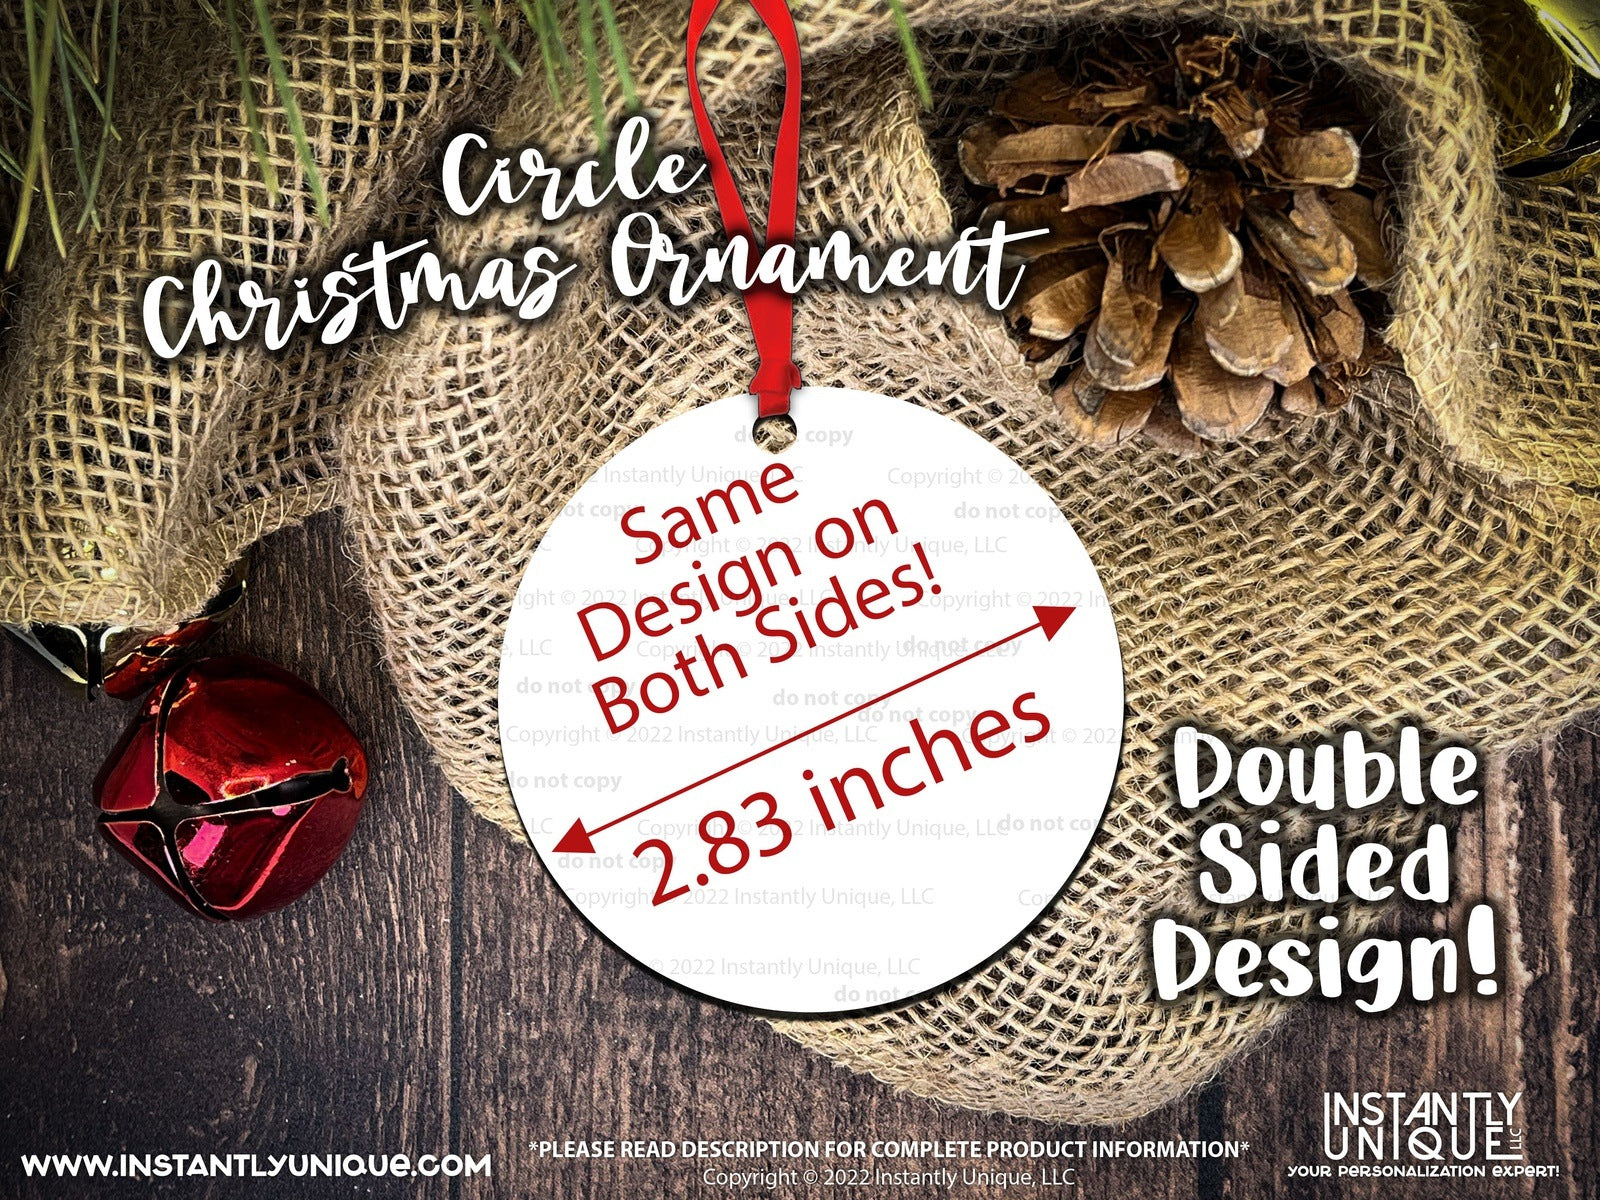 My First Apartment- Established 2022 - Double Sided Wooden Ornament